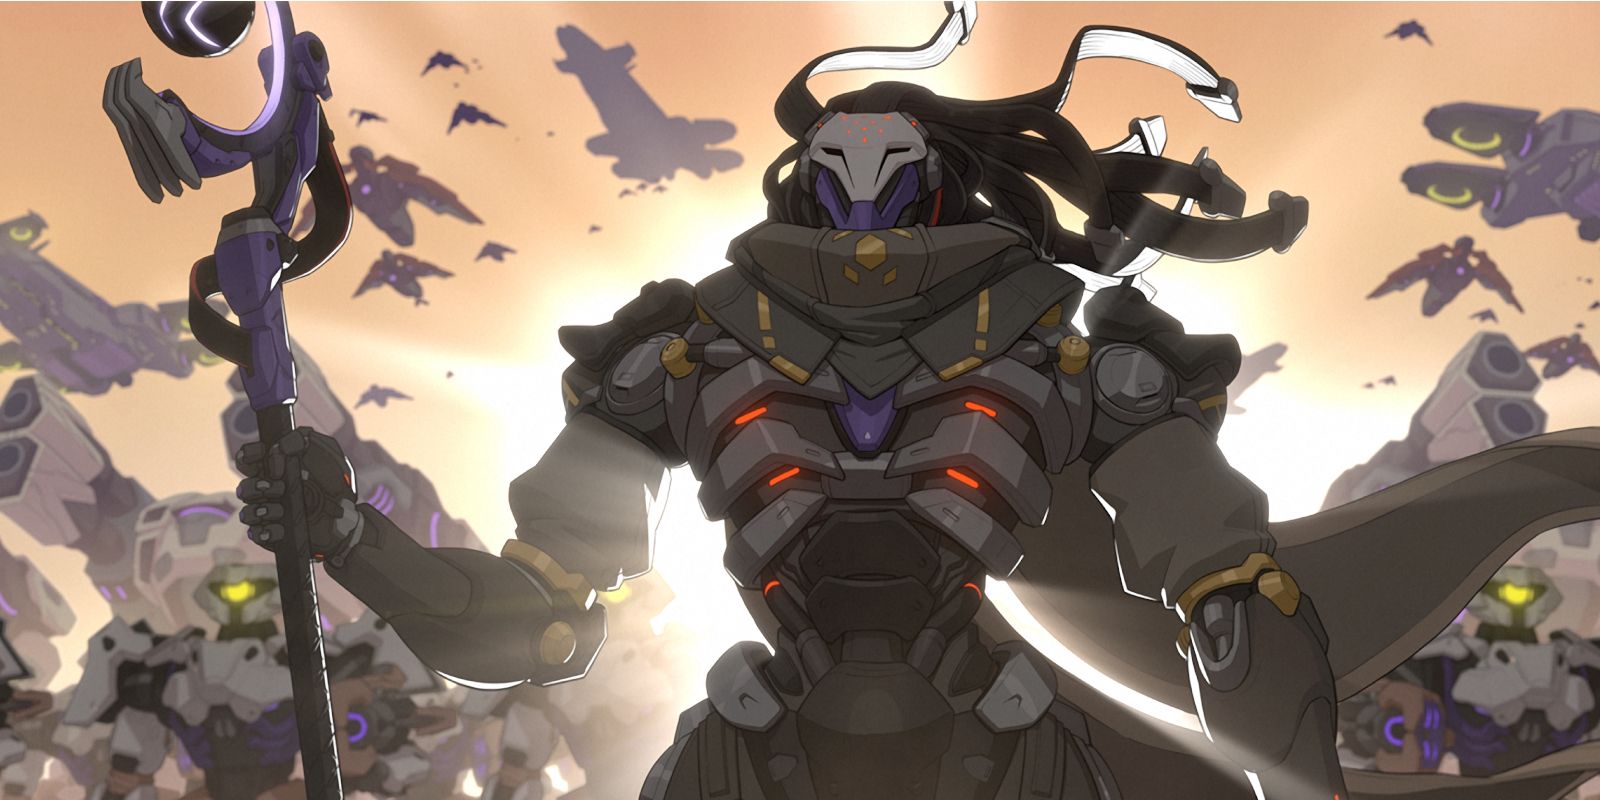 The Overwatch 2 hero Ramattra is seen leading an army of omnic forces with a long staff, flowing cords resembling hair, and an angelic light illuminating the character from the background.